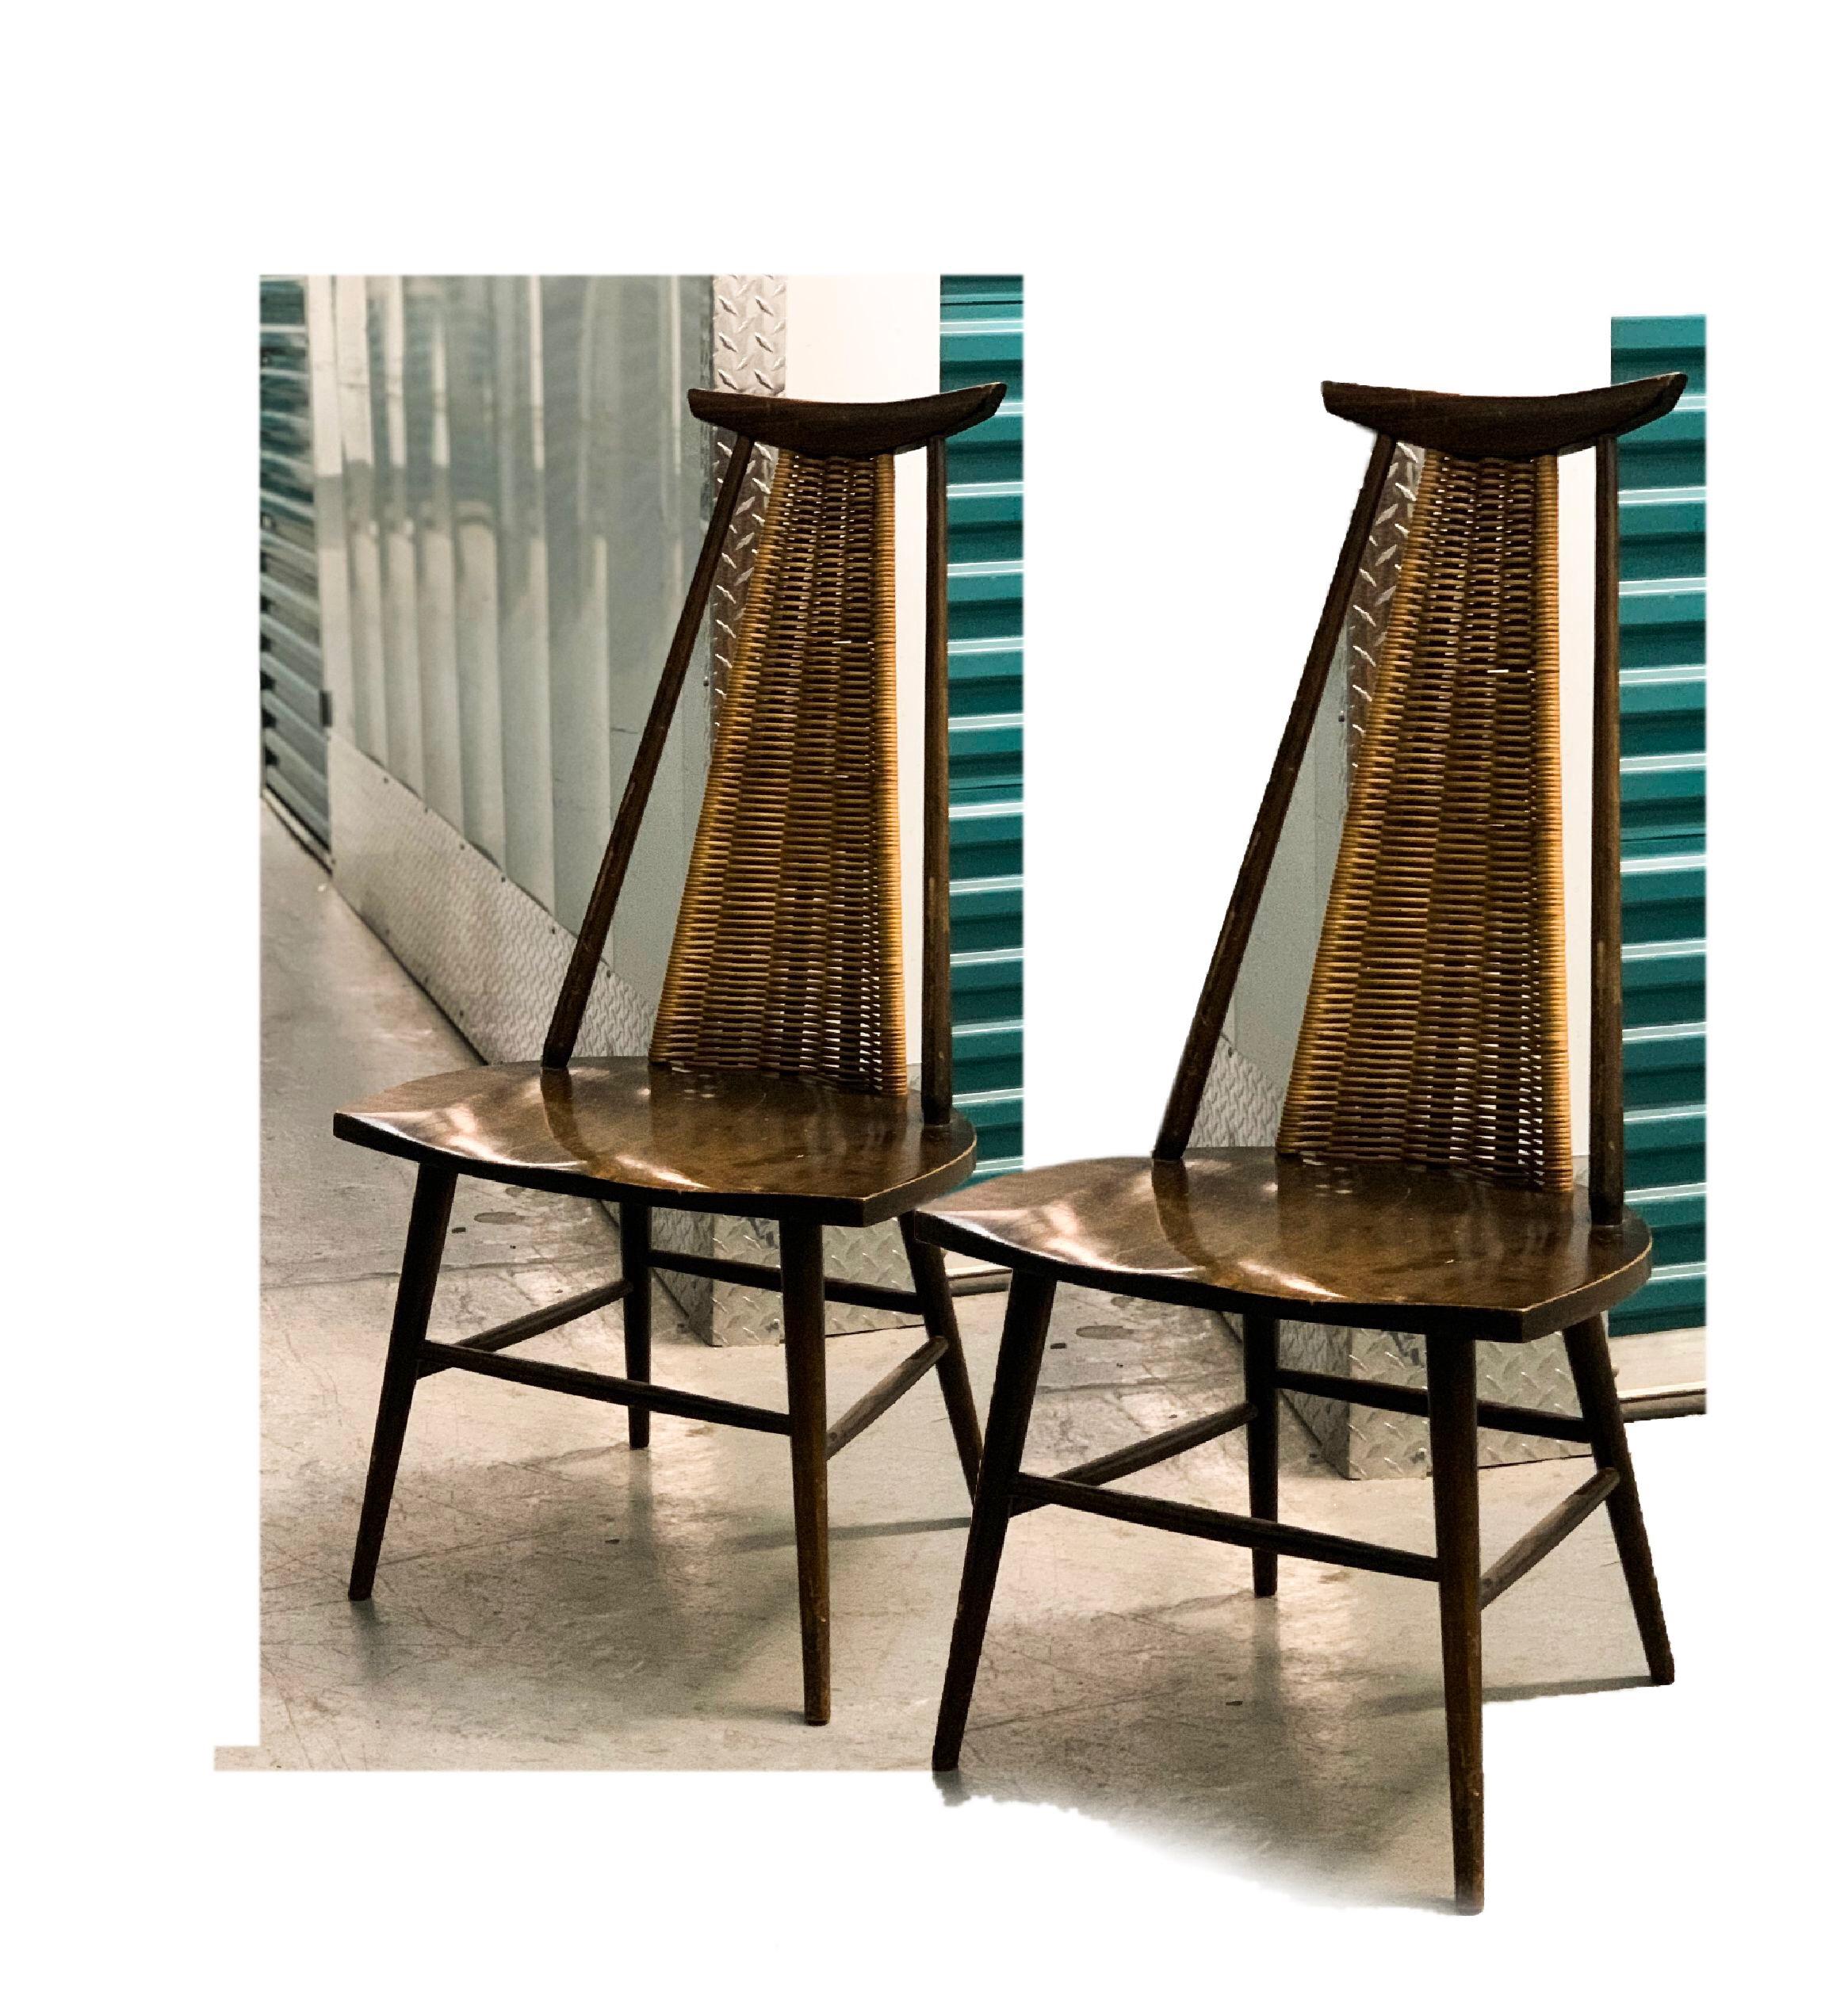 Striking 1950s wicker-back easy chairs by Finnish designer Ilmari Tapiovaara. 

Extremely rare and exquisite pair of easy chairs by Finnish Architect Ilmari Tapiovaara. The chairs are Fine example of Tapiovaara known to combine modern design